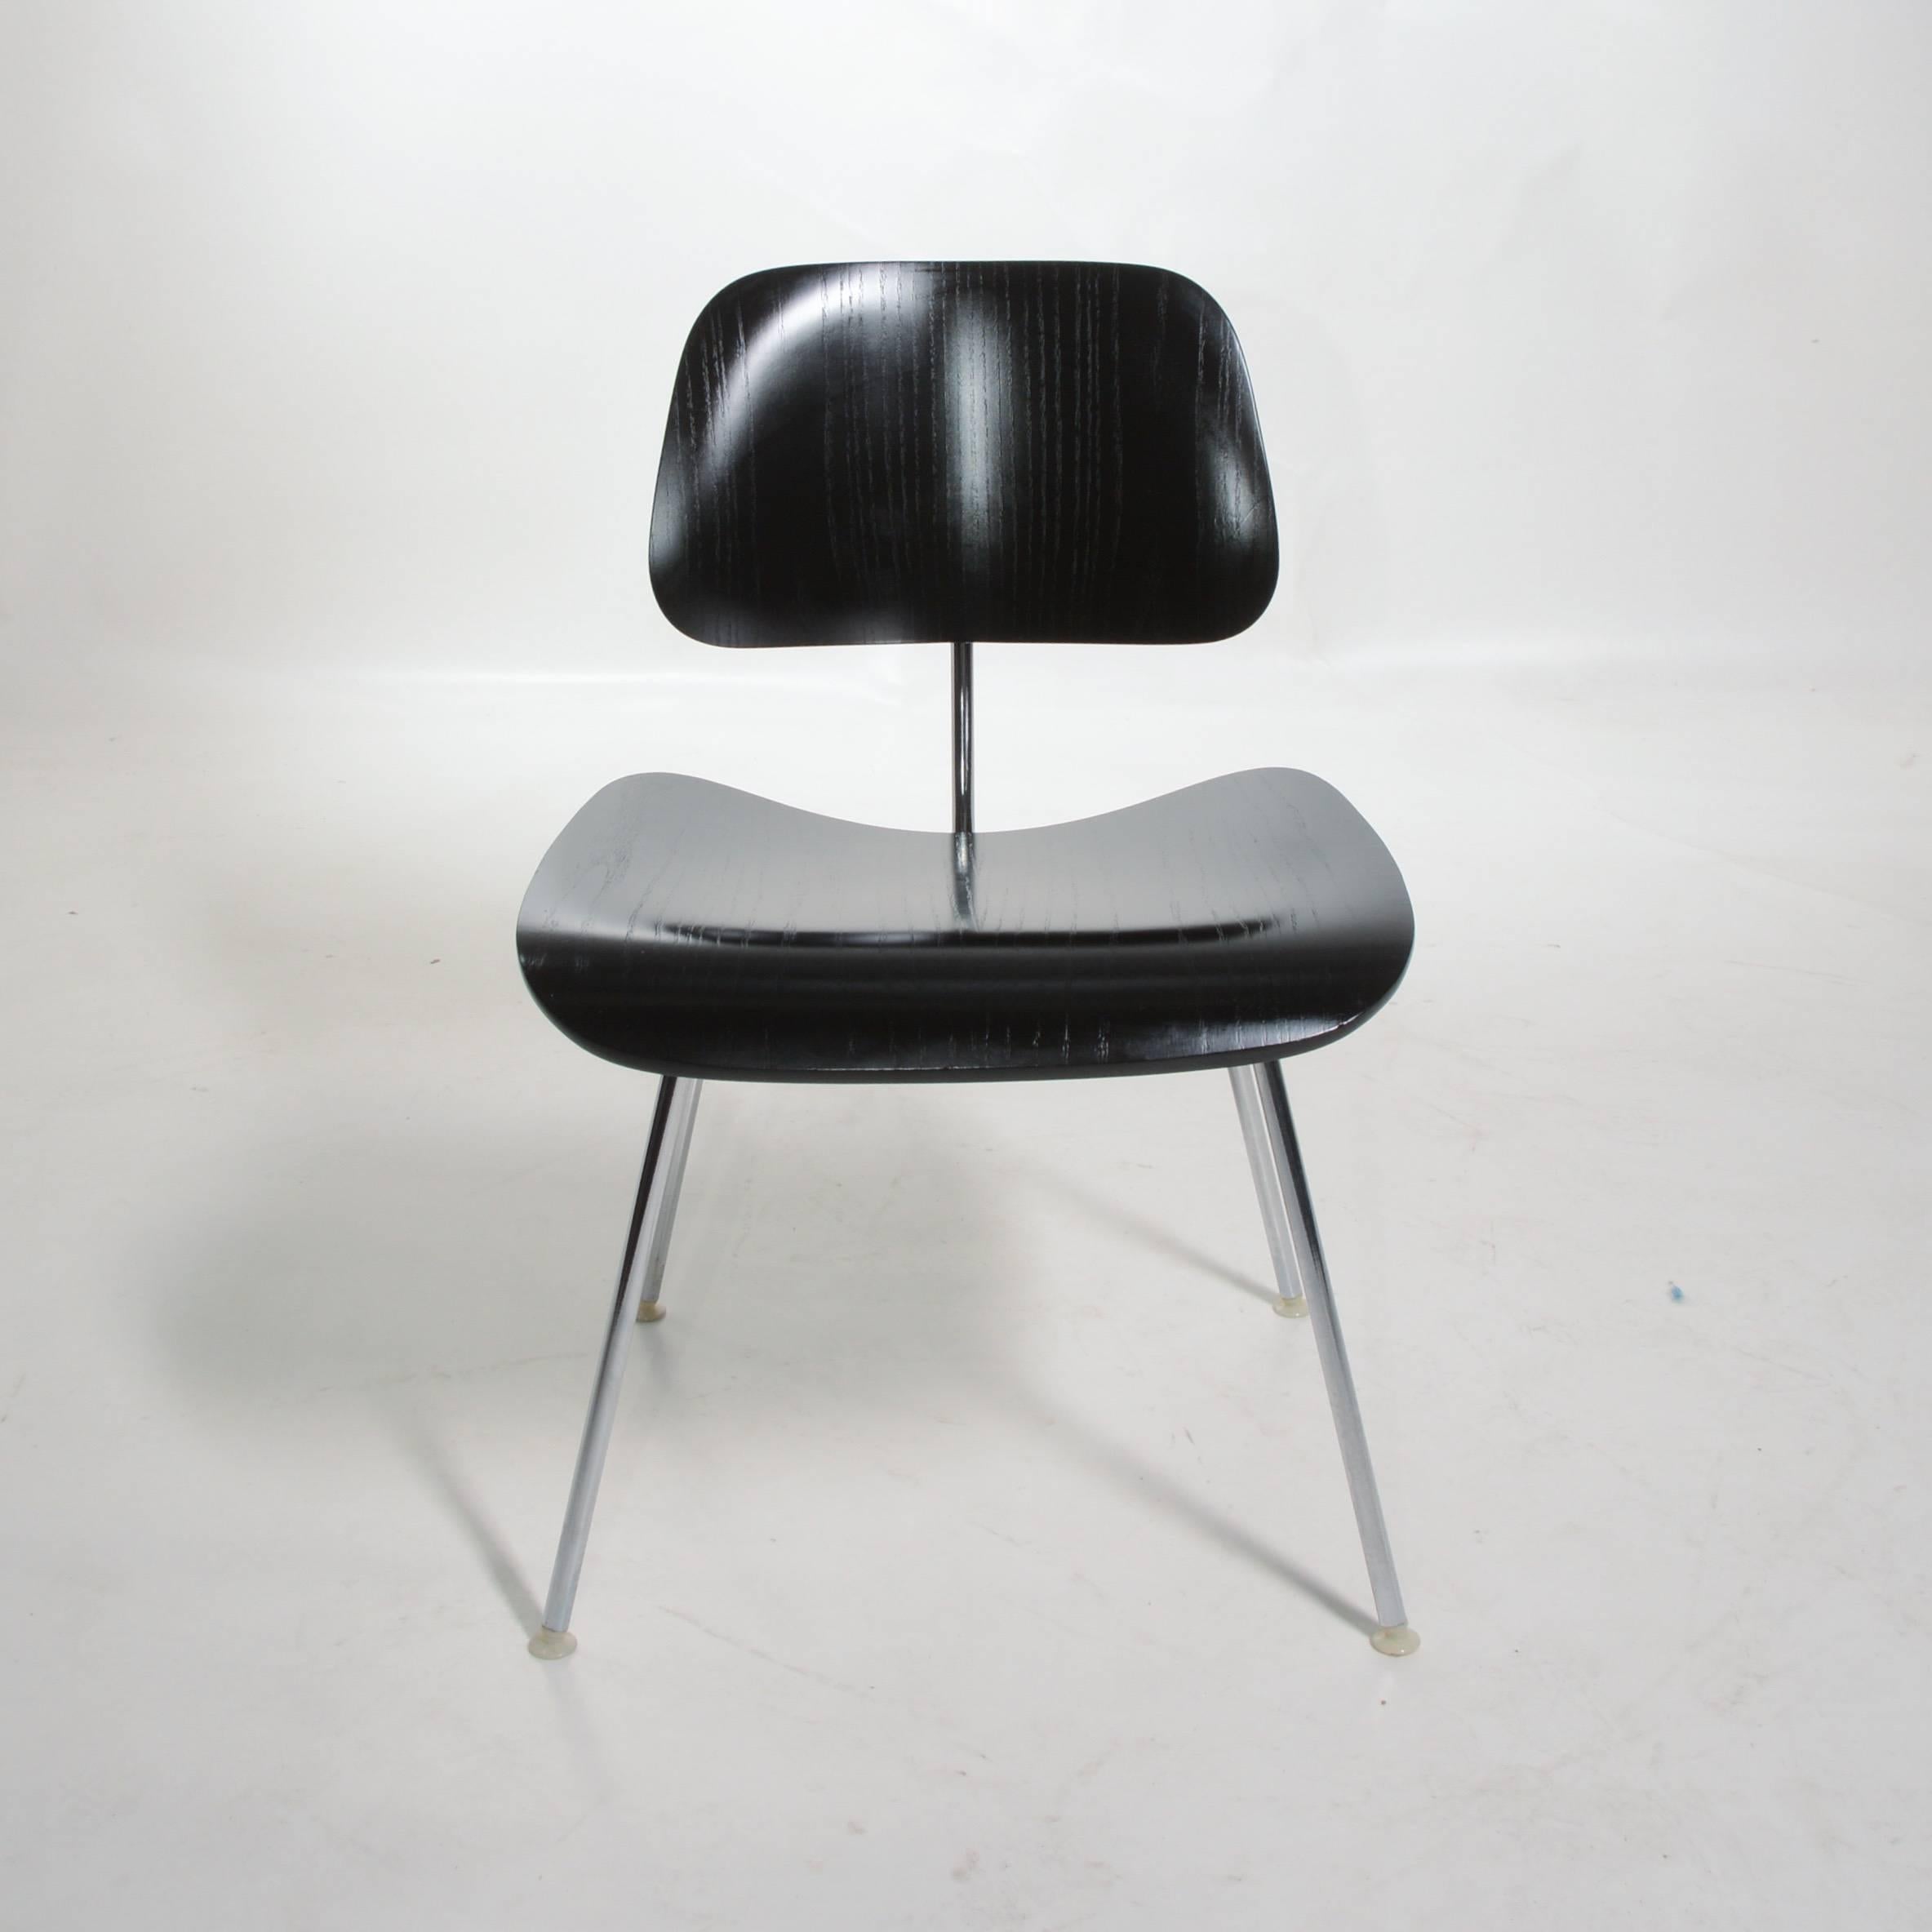 We have 4 black DCM (dining chair metal) chair by Charles and Ray Eames for Herman Miller. Original and in great condition.  